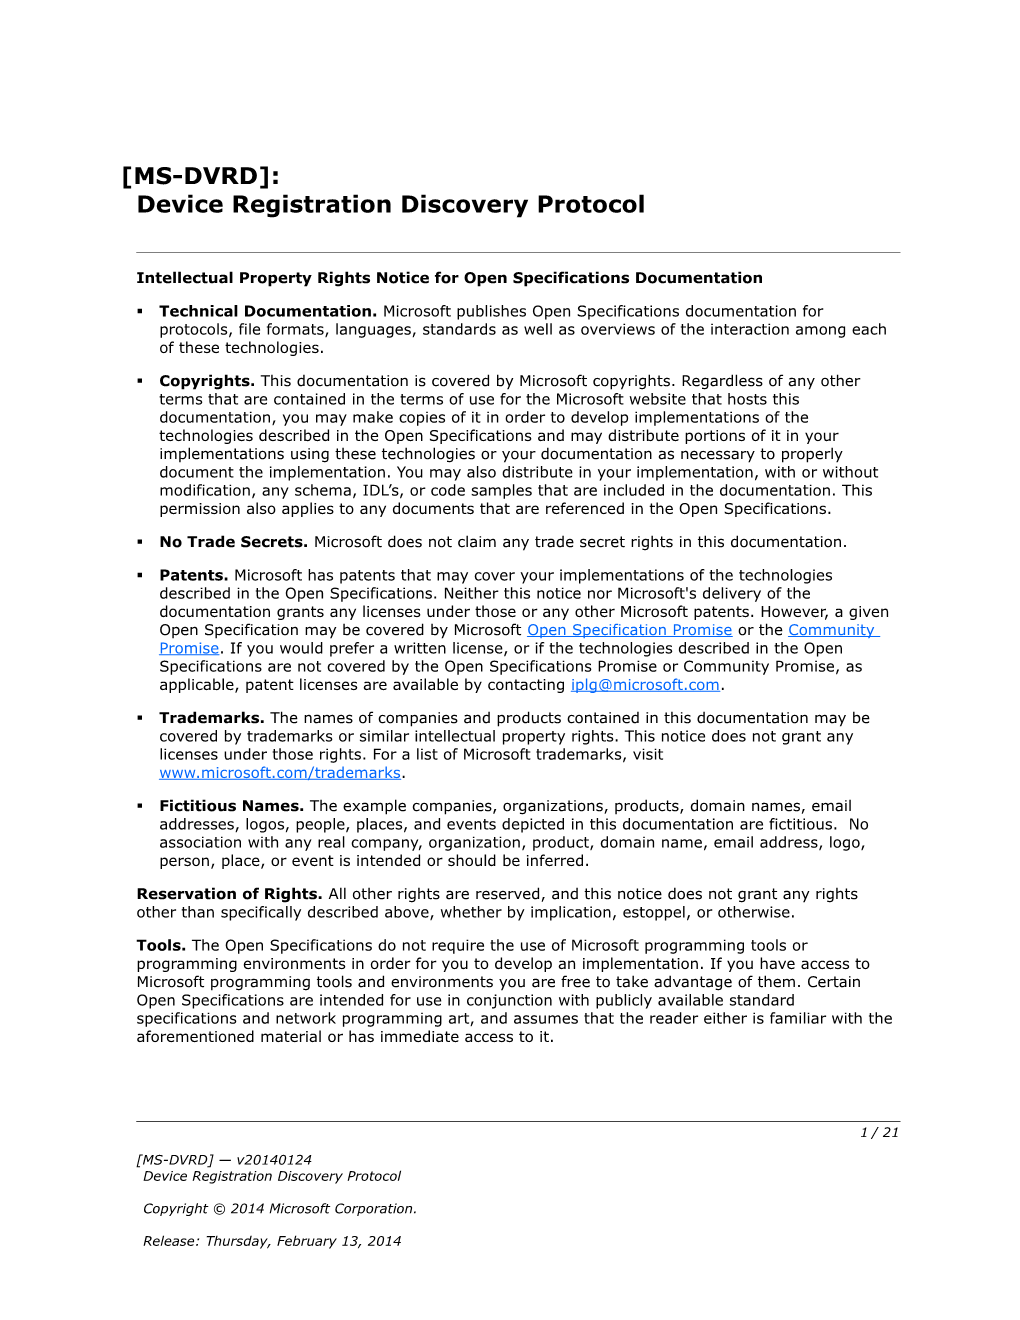 Intellectual Property Rights Notice for Open Specifications Documentation s50